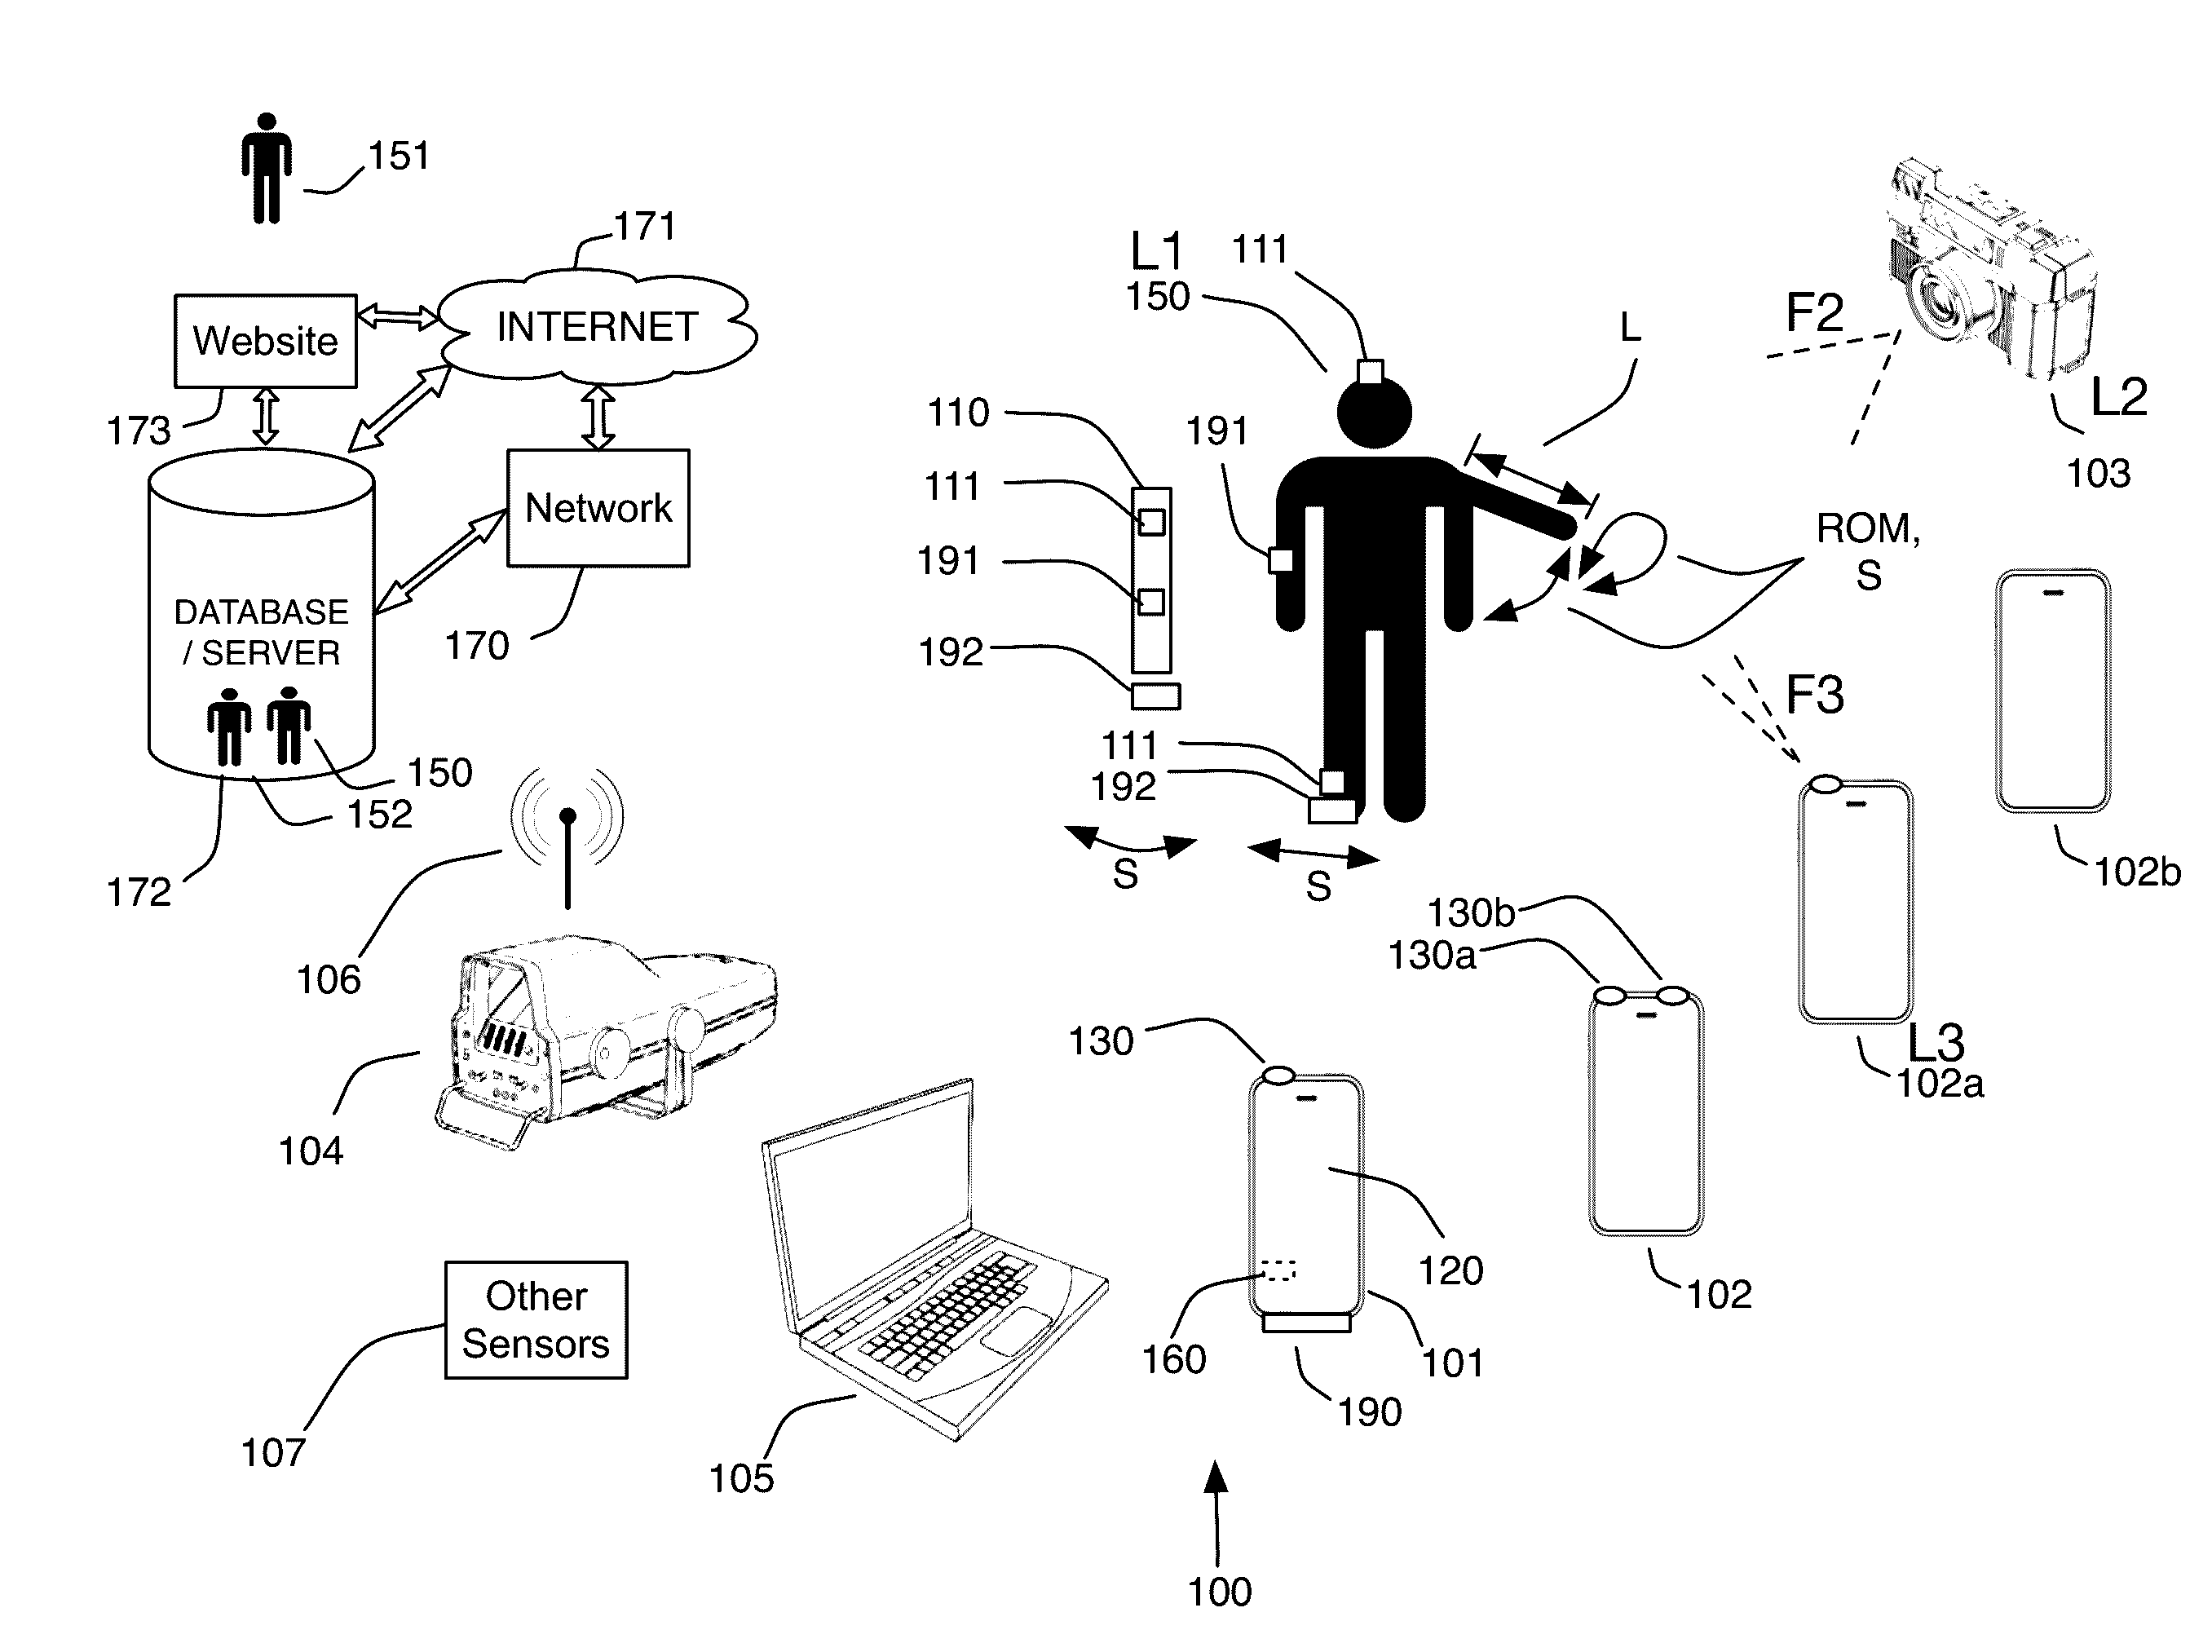 Sensor and media event detection and tagging system